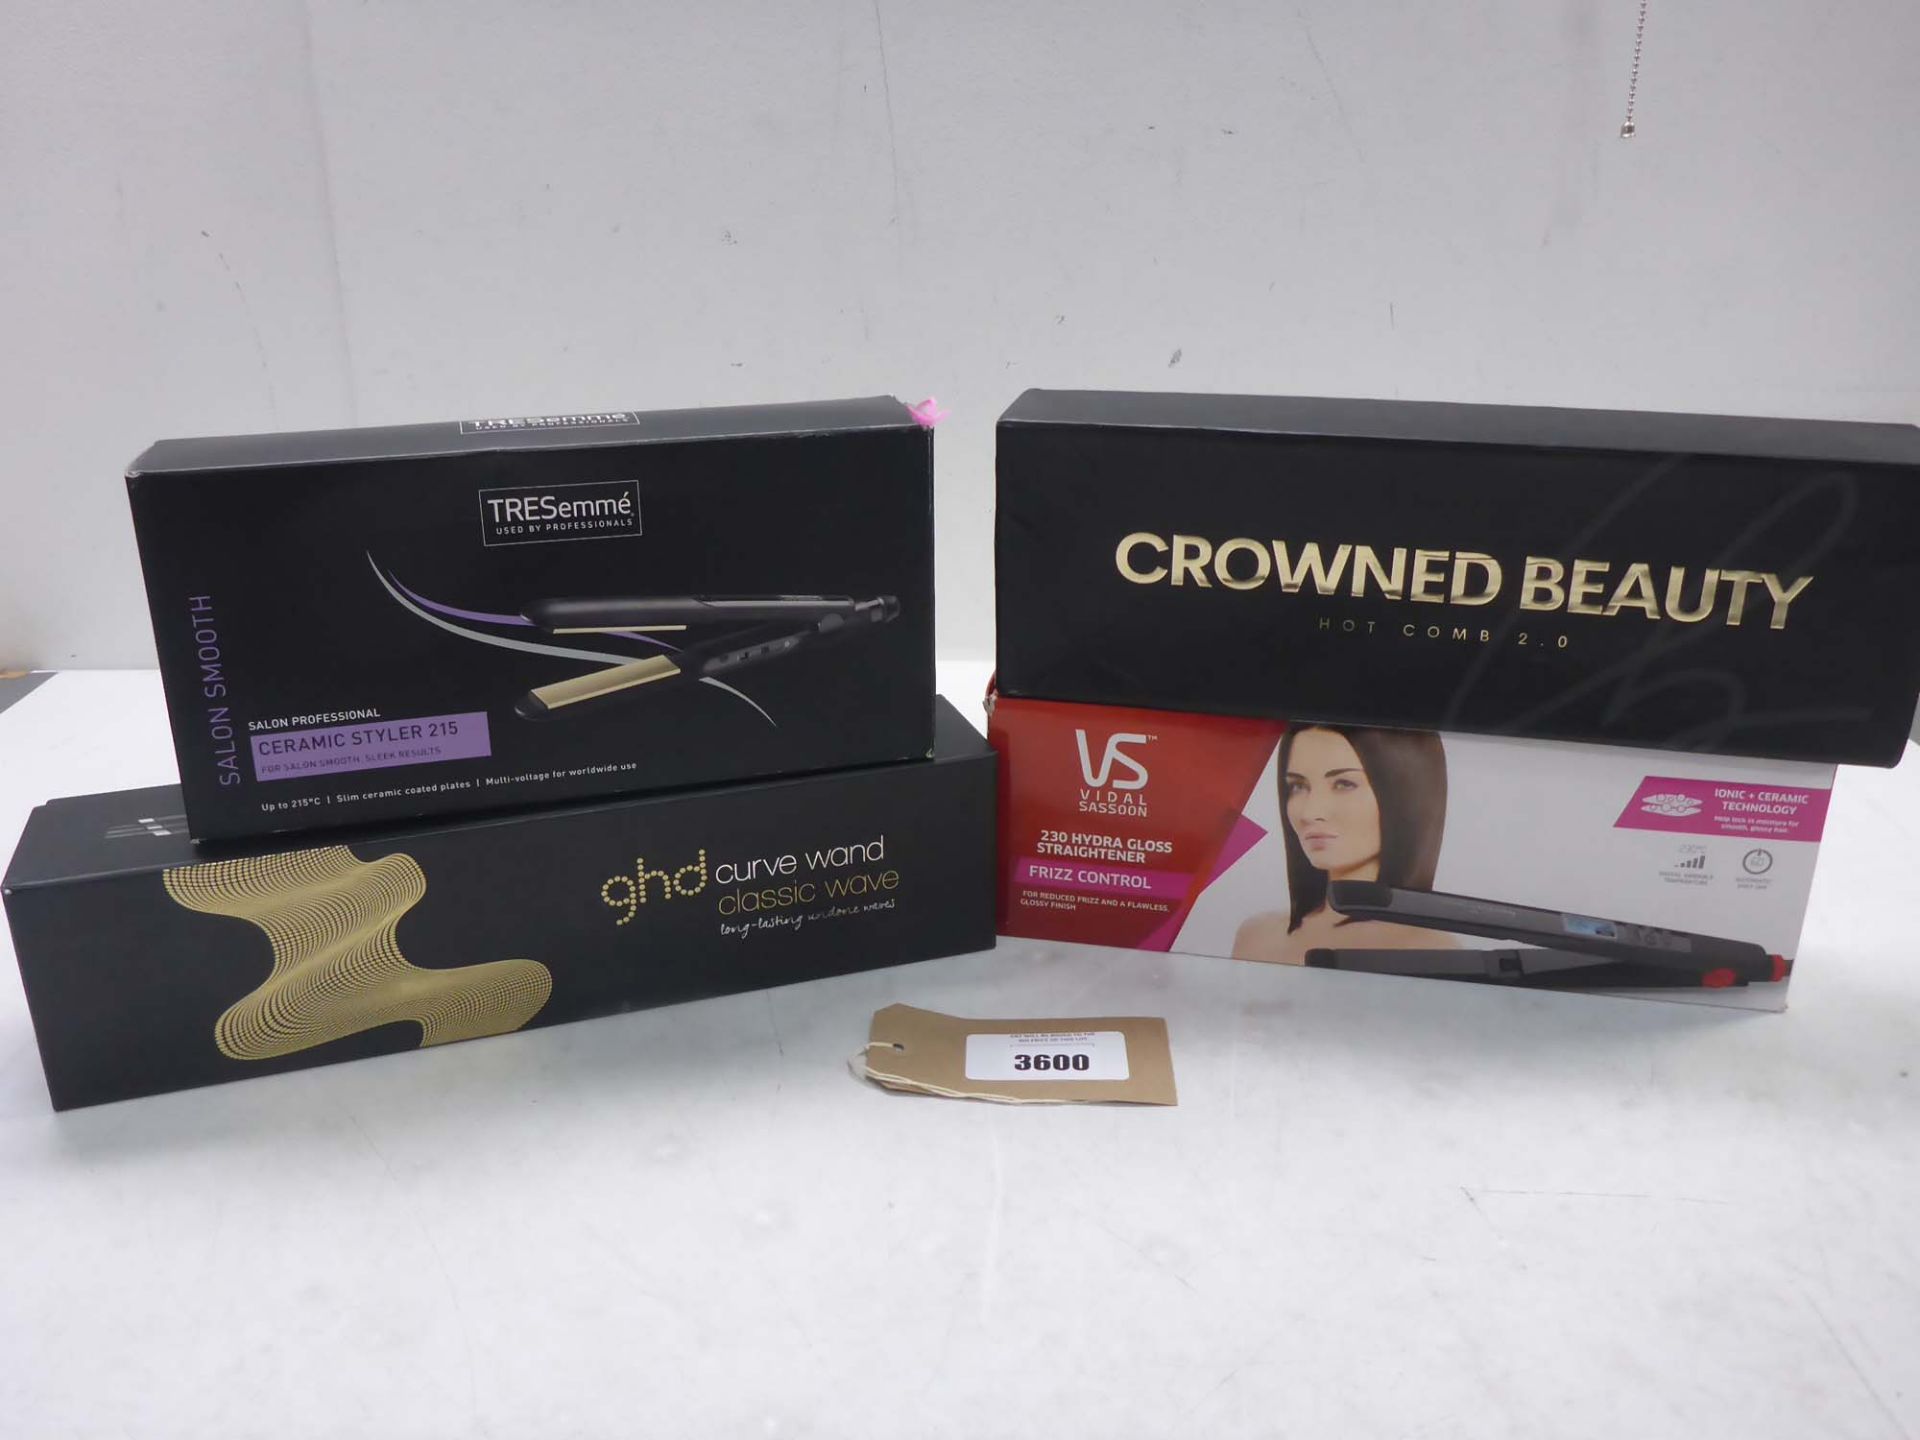 GHD curve wand classic wave, TRESemme ceramic 215 styler Vidal Sassoon hydro gloss straighteners and